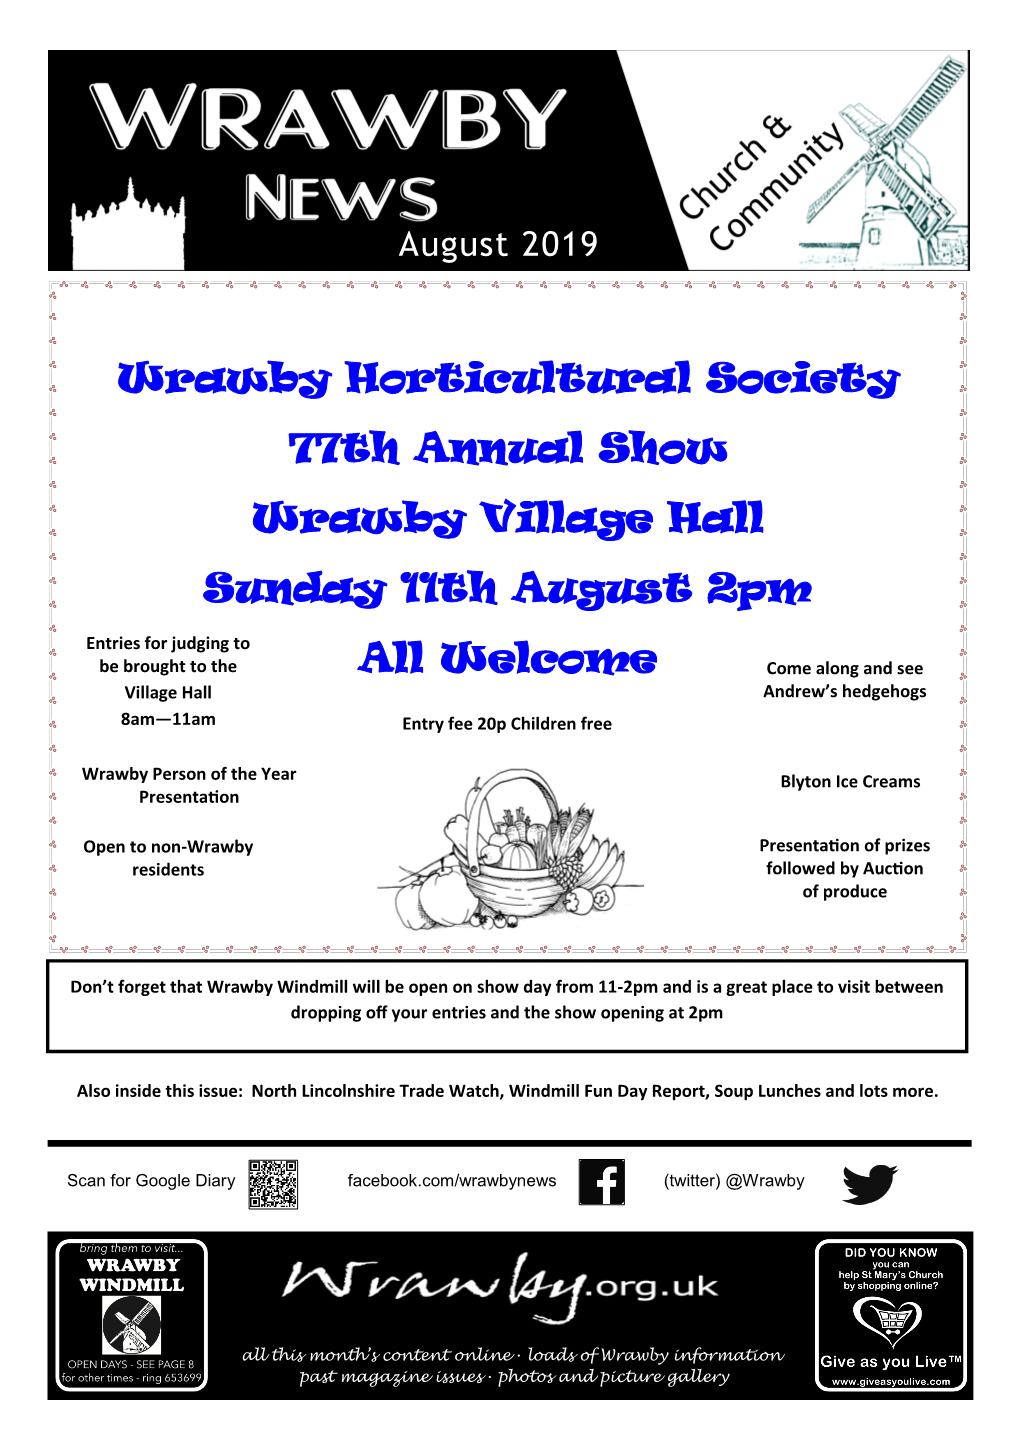 Wrawby Horticultural Society 77Th Annual Show Wrawby Village Hall Sunday 11Th August 2Pm